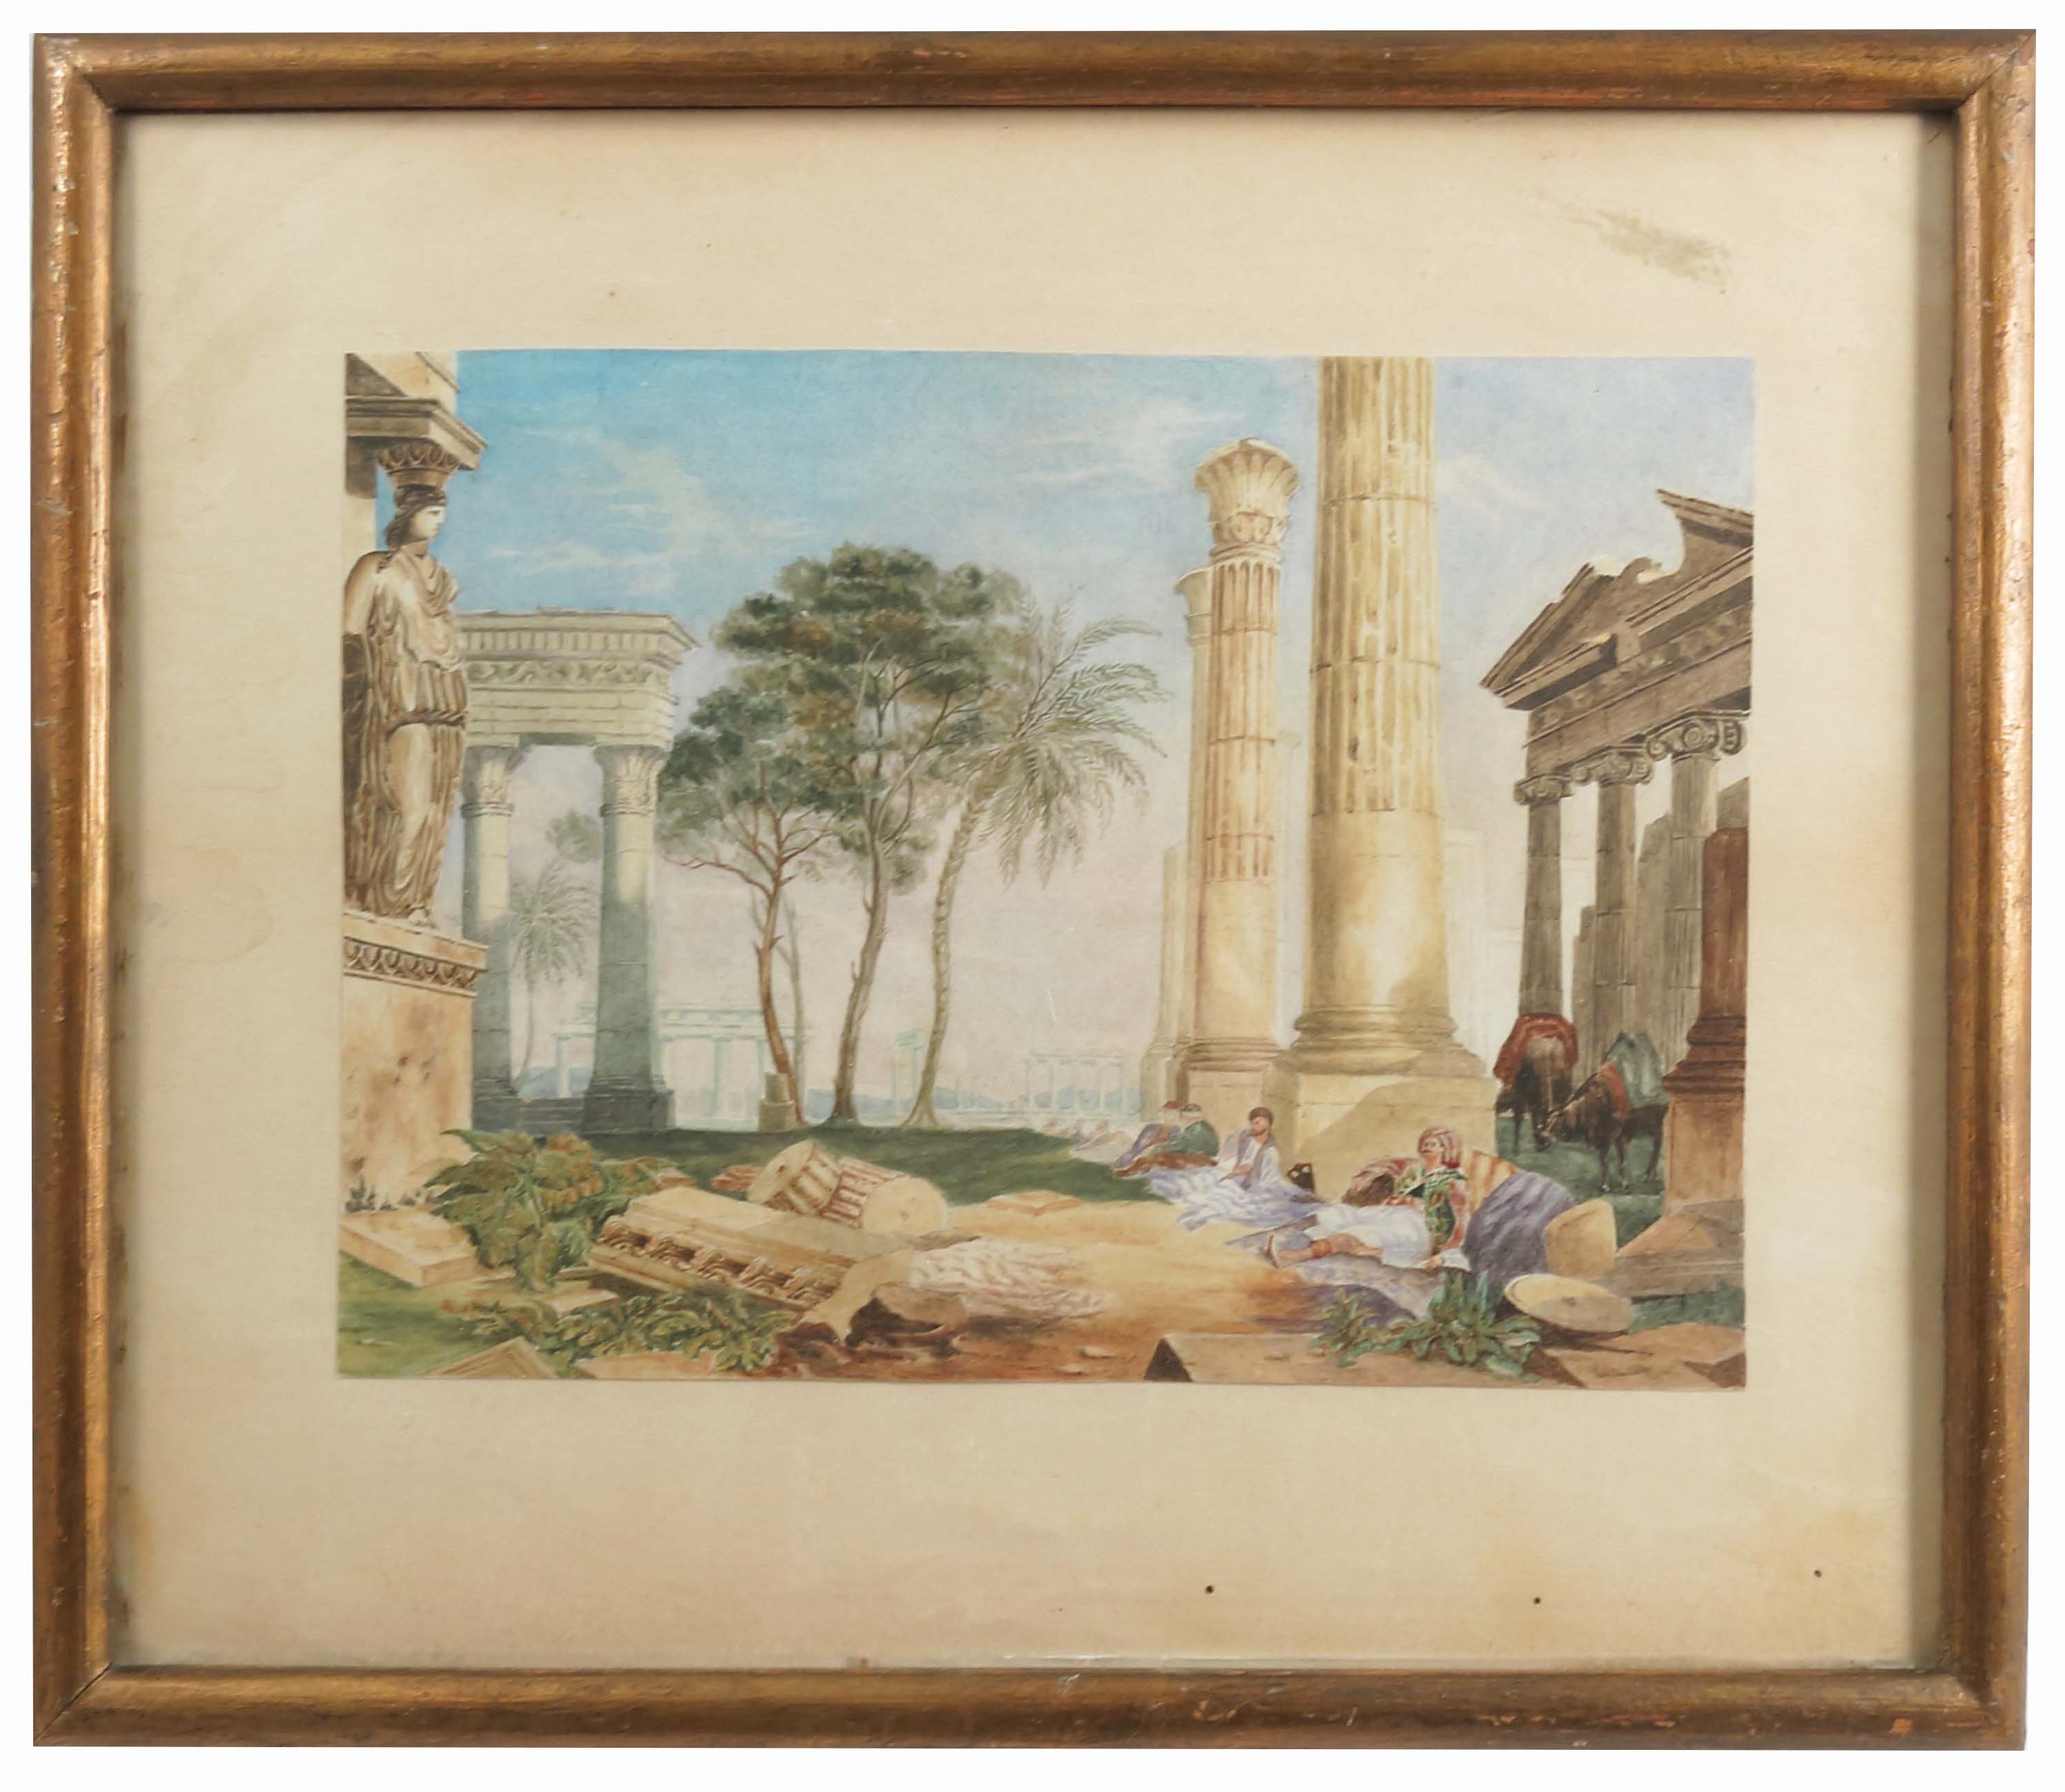 A 19th century watercolour, figures sleeping by Classical ruins, 7.75ins x 10.5ins